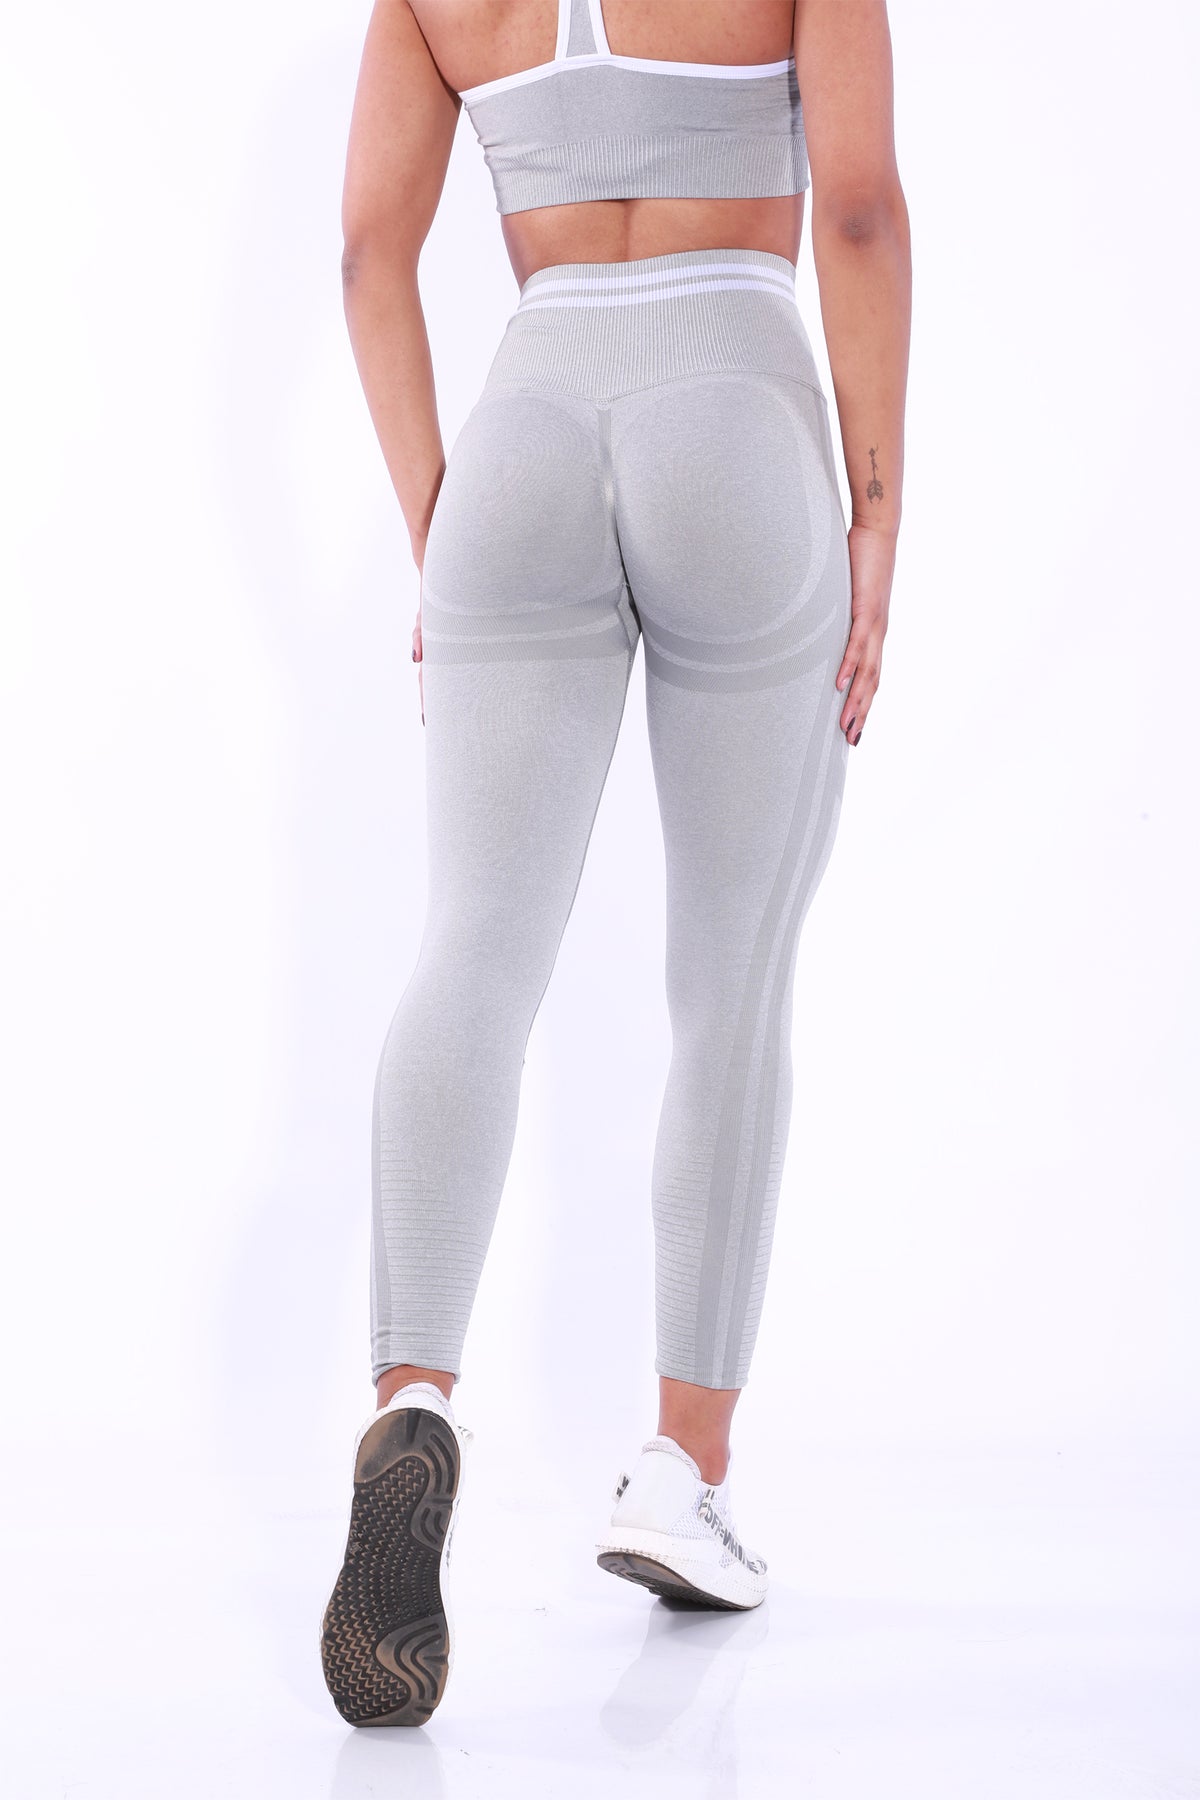 Gymbunny Seamless scrunch leggings have contour shadowing designed